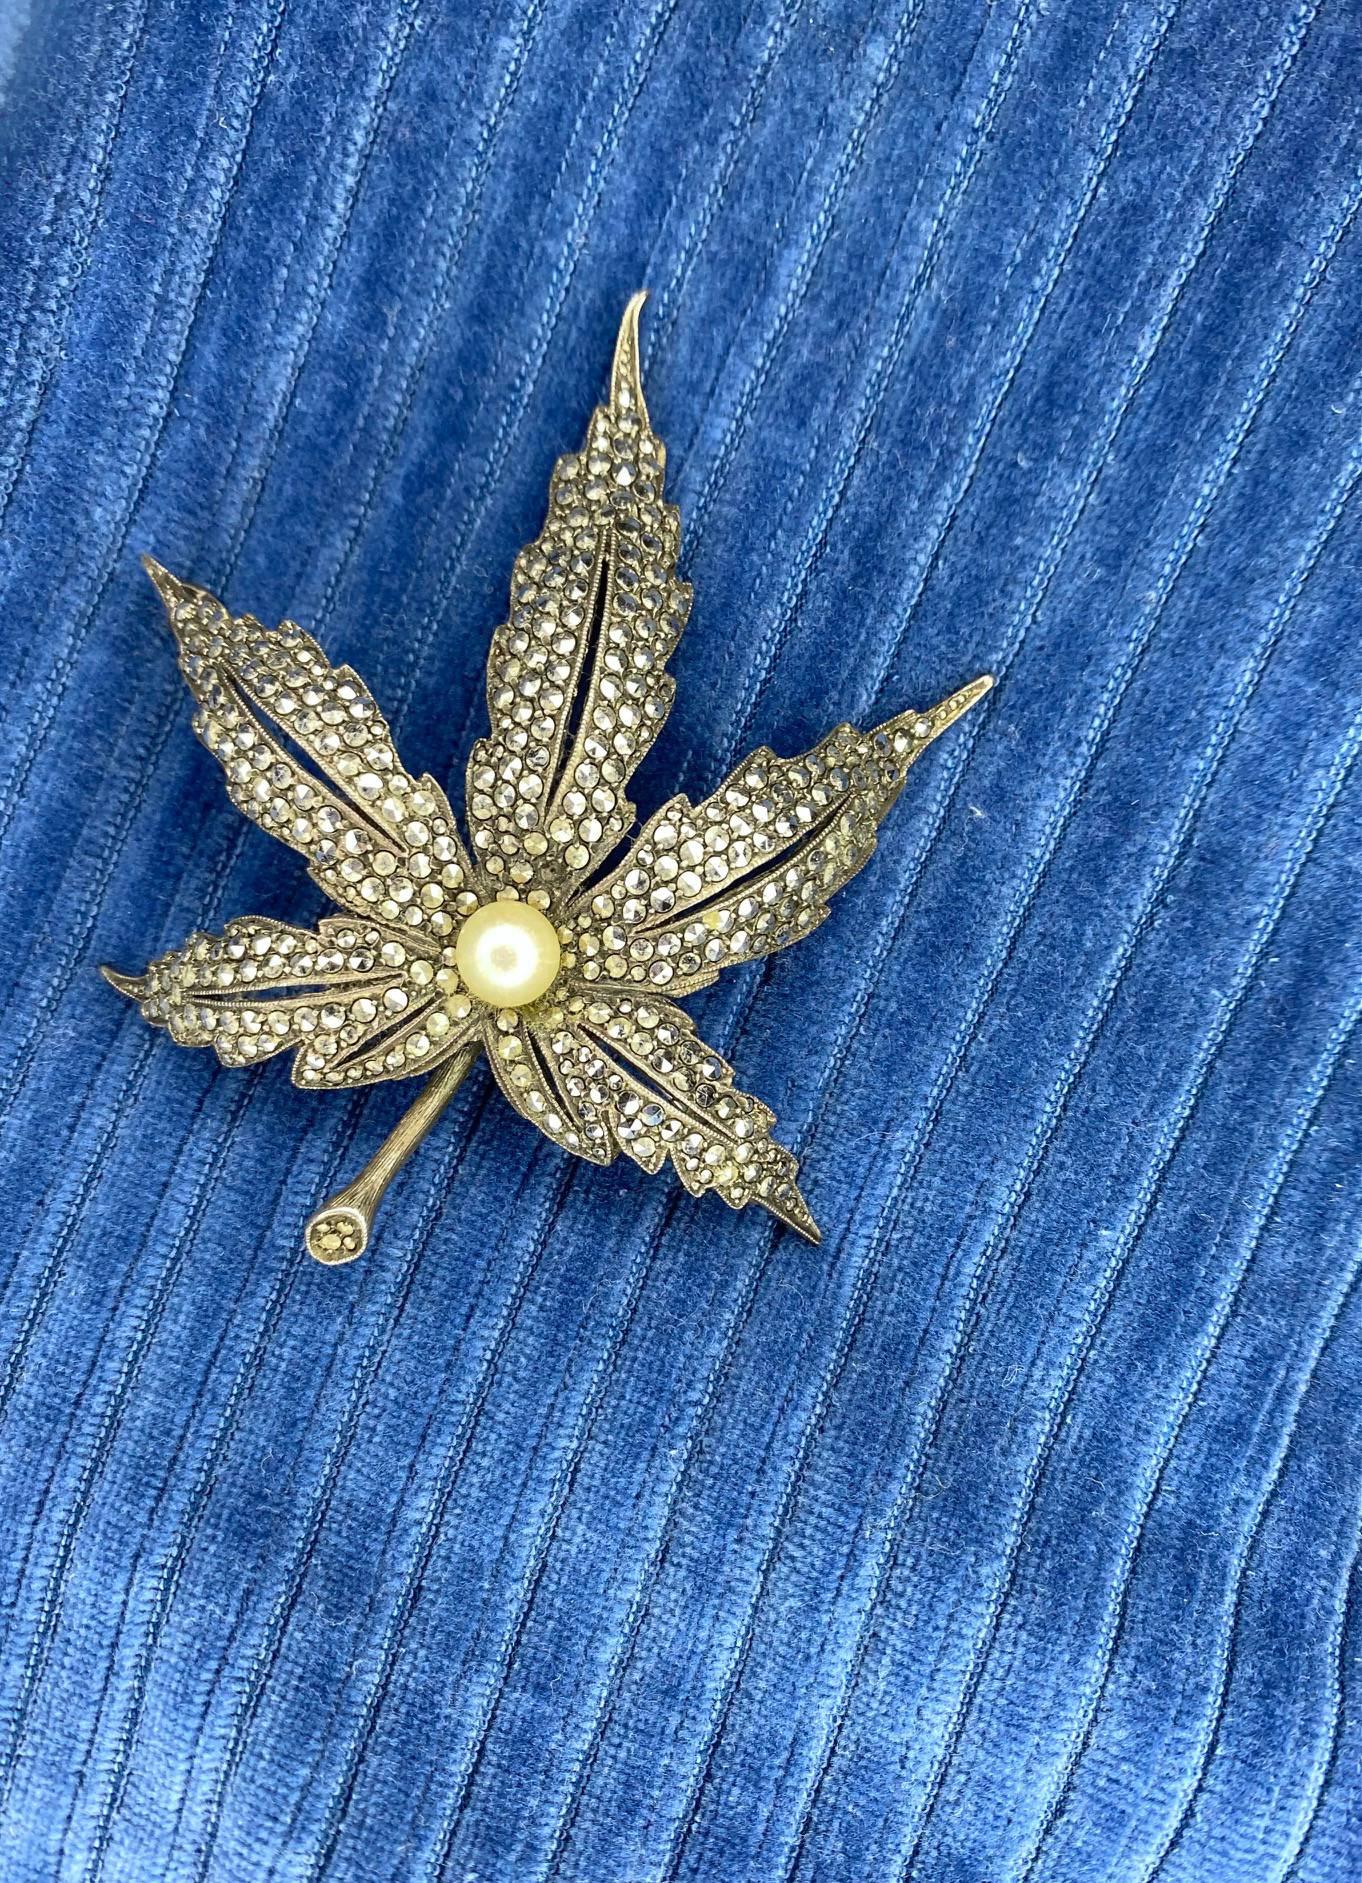 This vintage 1980s Christian Dior brooch delivers timeless elegance. Crafted from silver-plated steel, it features a leaf shape accented with crystals and a single pearl. The brooch is in very good original condition, making it a true collectible